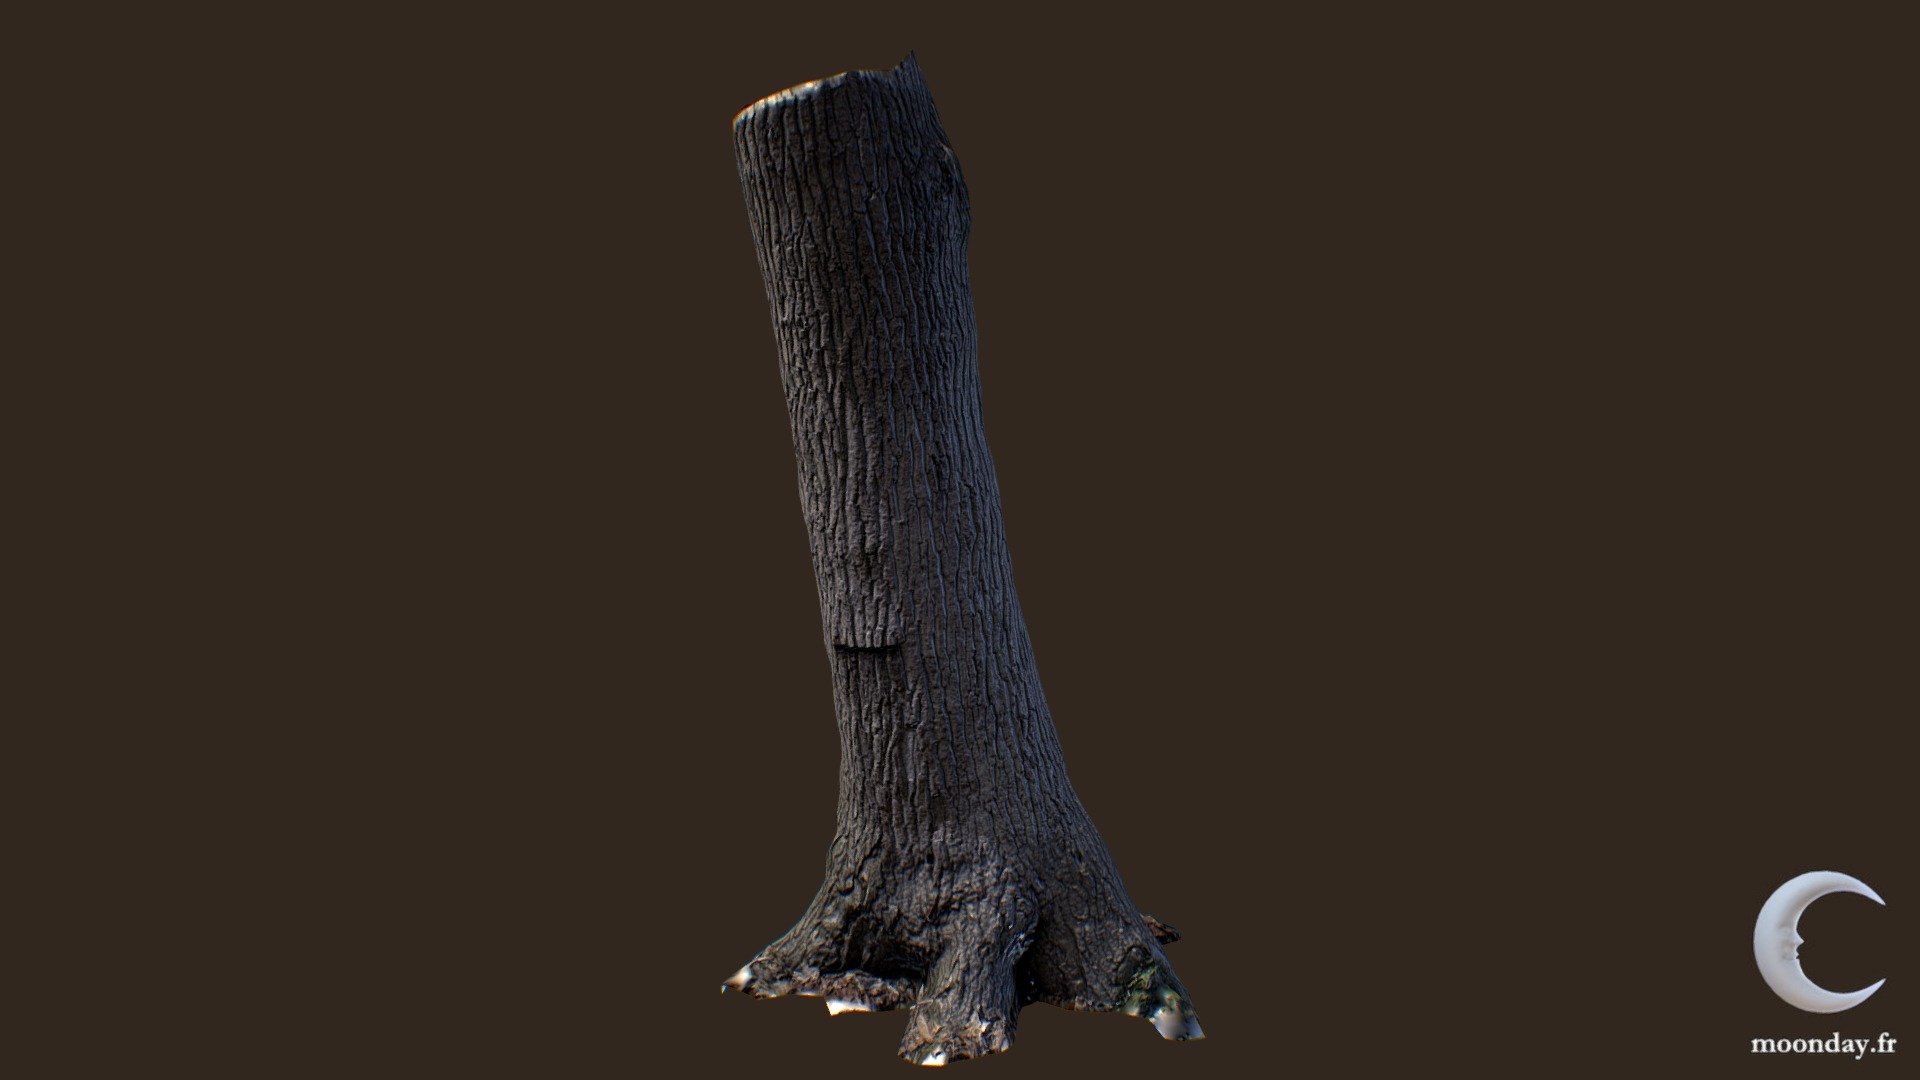 Mesh generated from photogrammetry data, also available in a pack of 12 tree trunks: https://sketchfab.com/3d-models/3d-scanned-tree-trunks-pack-01-989a4a762db44c4384a9262ee63accaf

The mesh comes with 4K Albedo, Specular, Cavity, Normal, Height and AO textures

More information at http://www.blog.moonday.fr/2020/07/sketchfab-store-pack-02.html - 3D scanned Tree trunk 01 - Buy Royalty Free 3D model by 1k0 3d model